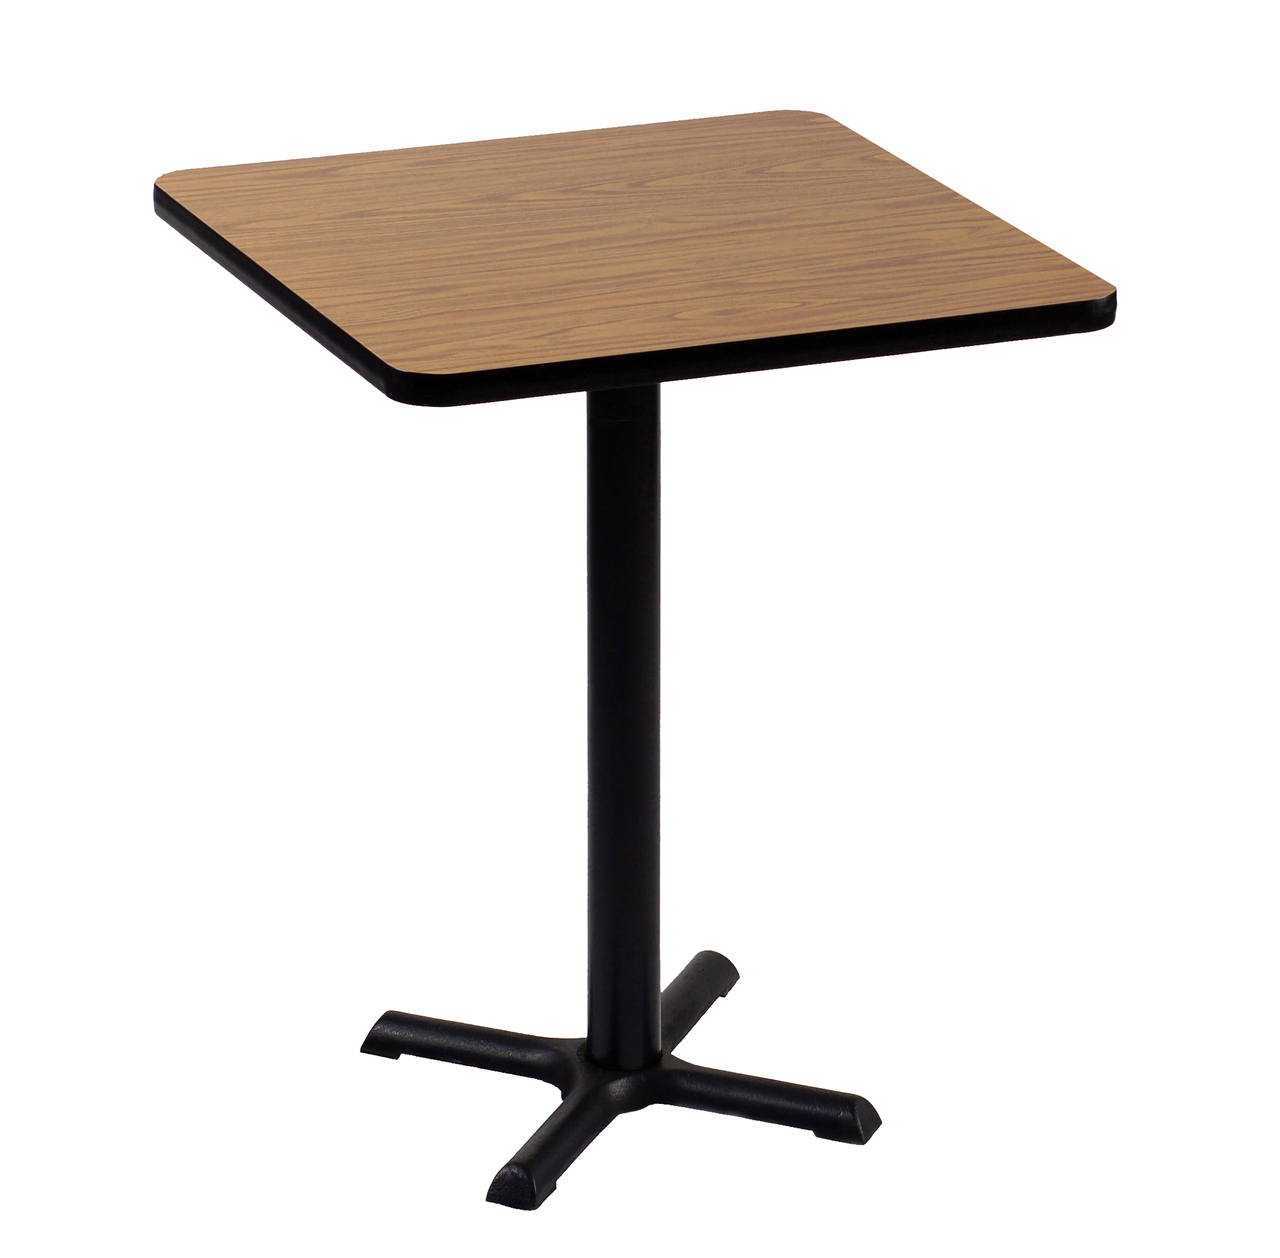 Correll Bxb42S-20 Cafe and Breakroom Tables - Square Bar Stool-Standing Height - Mahogany